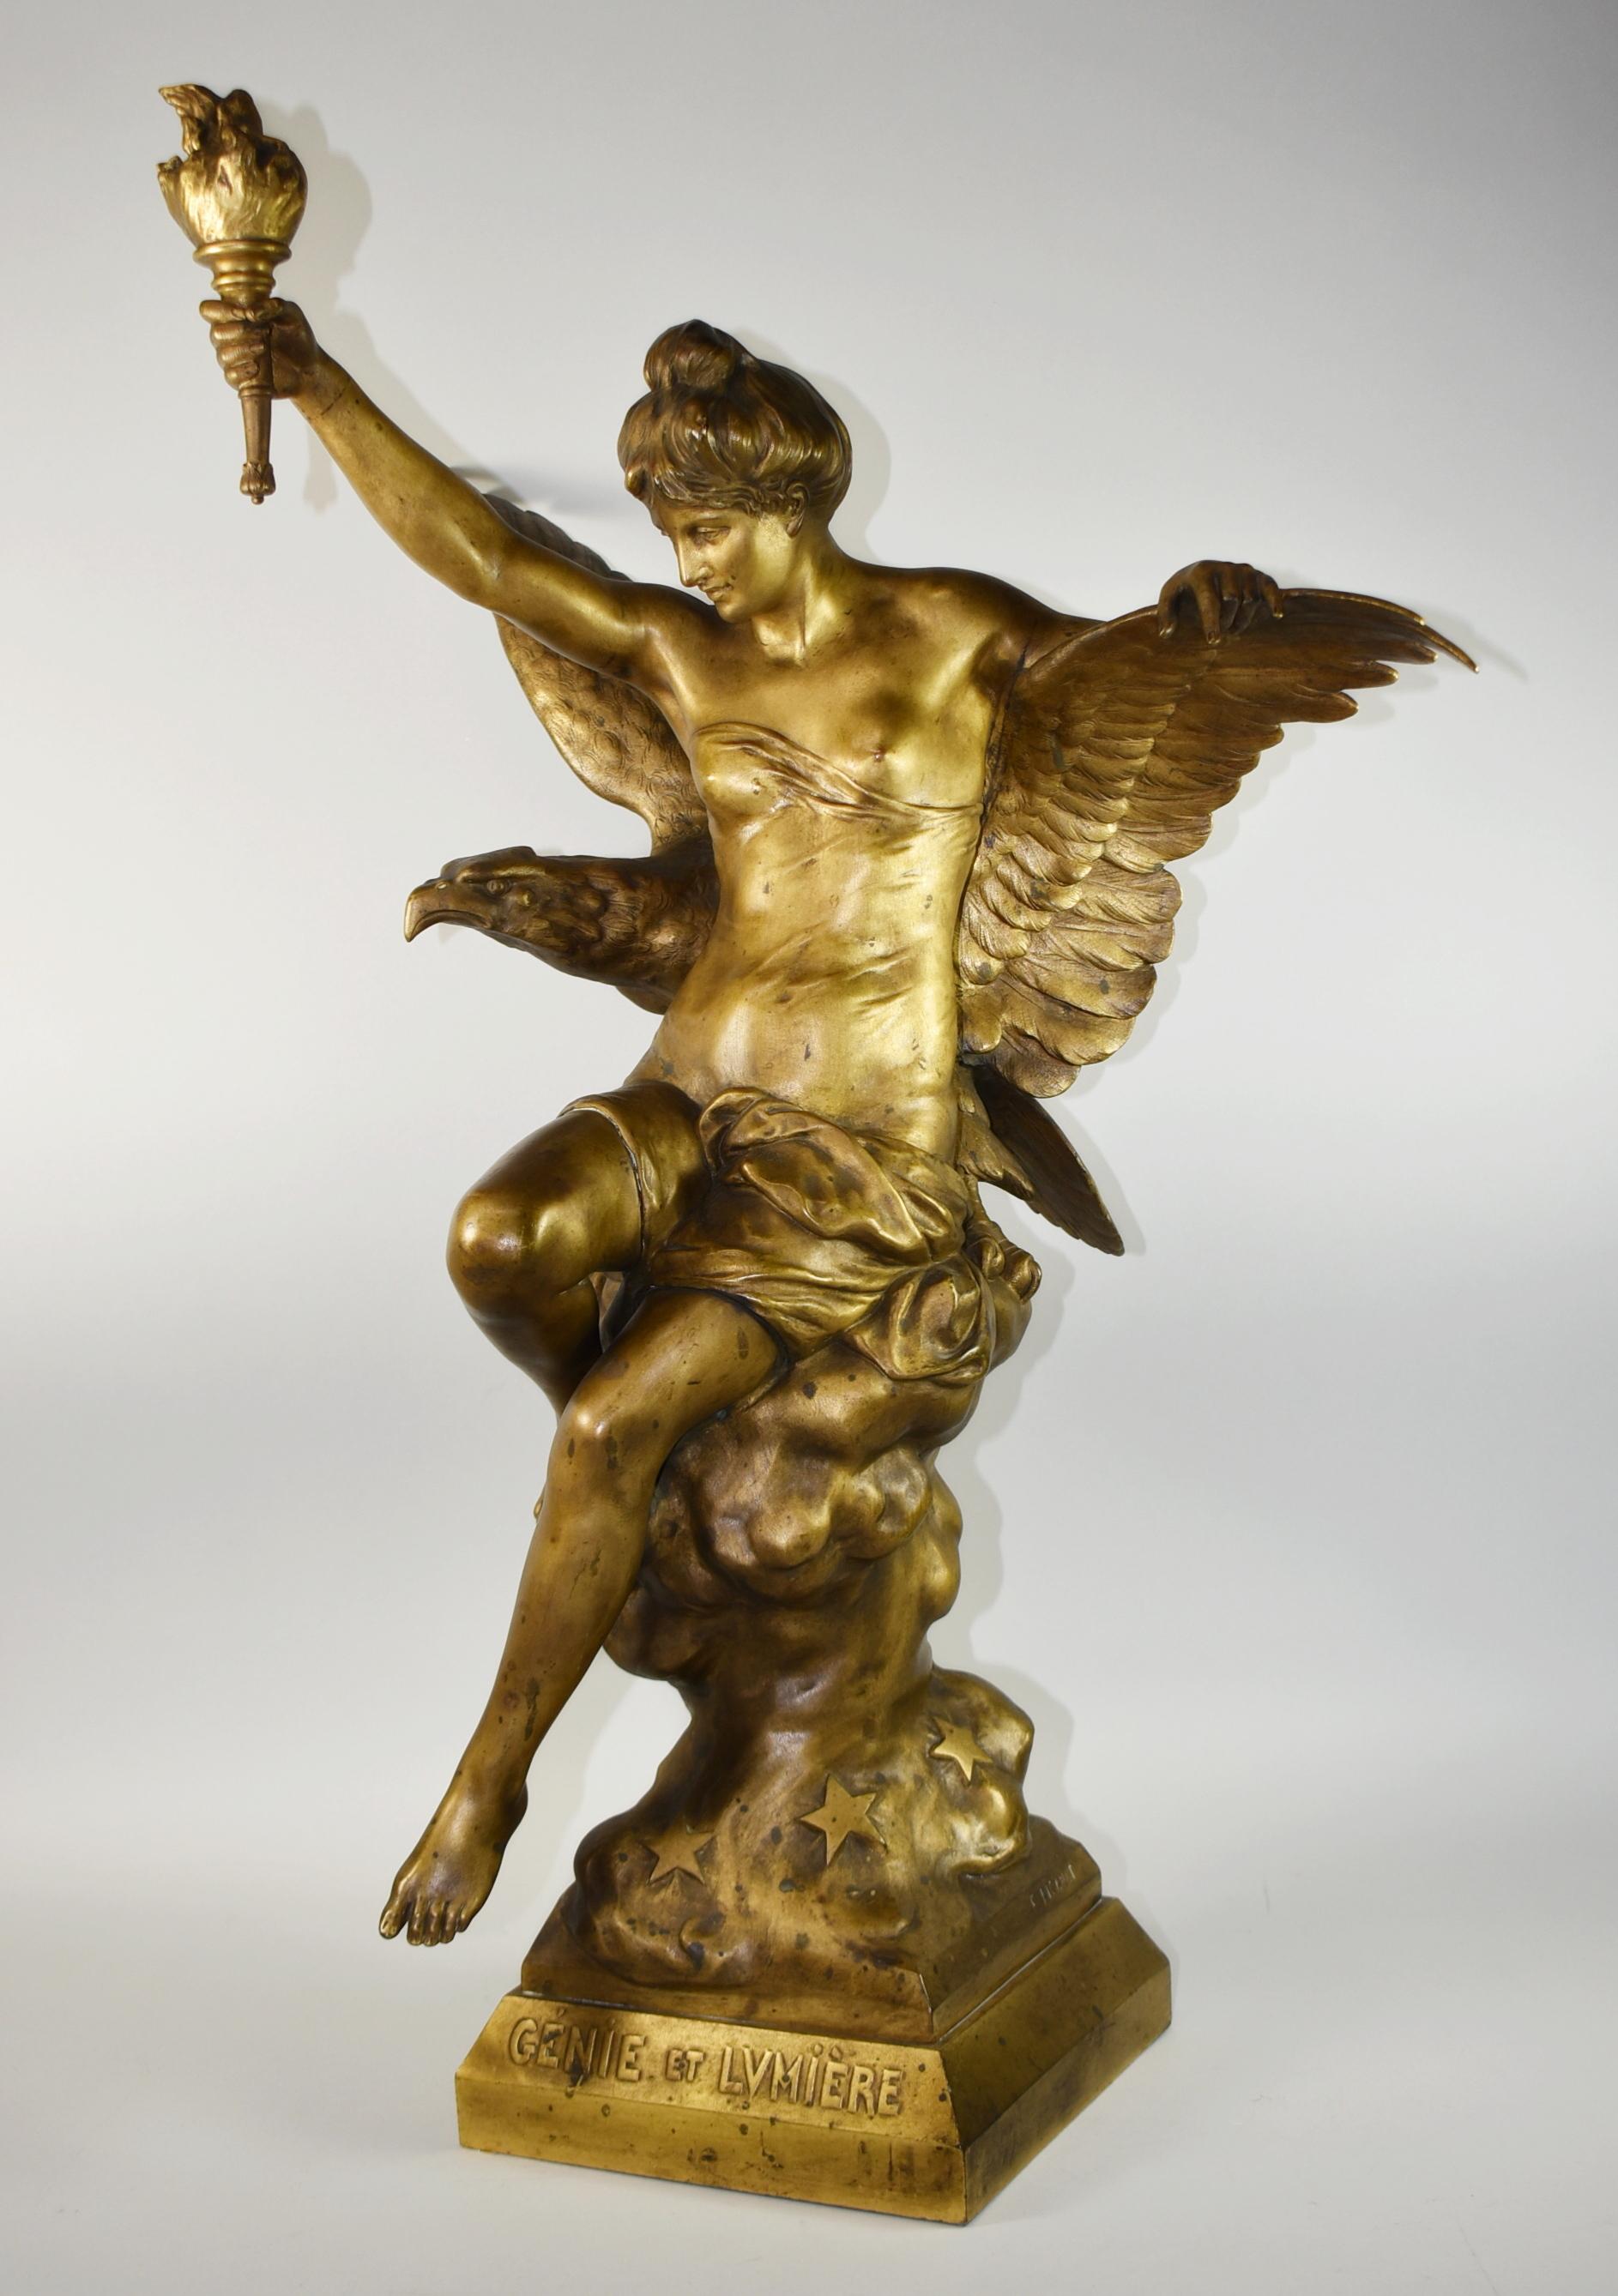 Beautiful bronze sculpture by Emile Picault. This statuary is of a woman holding a torch sitting on a rock with stars. An eagle with outstretched wings stands behind her. The eagle has great details in the feathers and head. Bottom of sculpture has